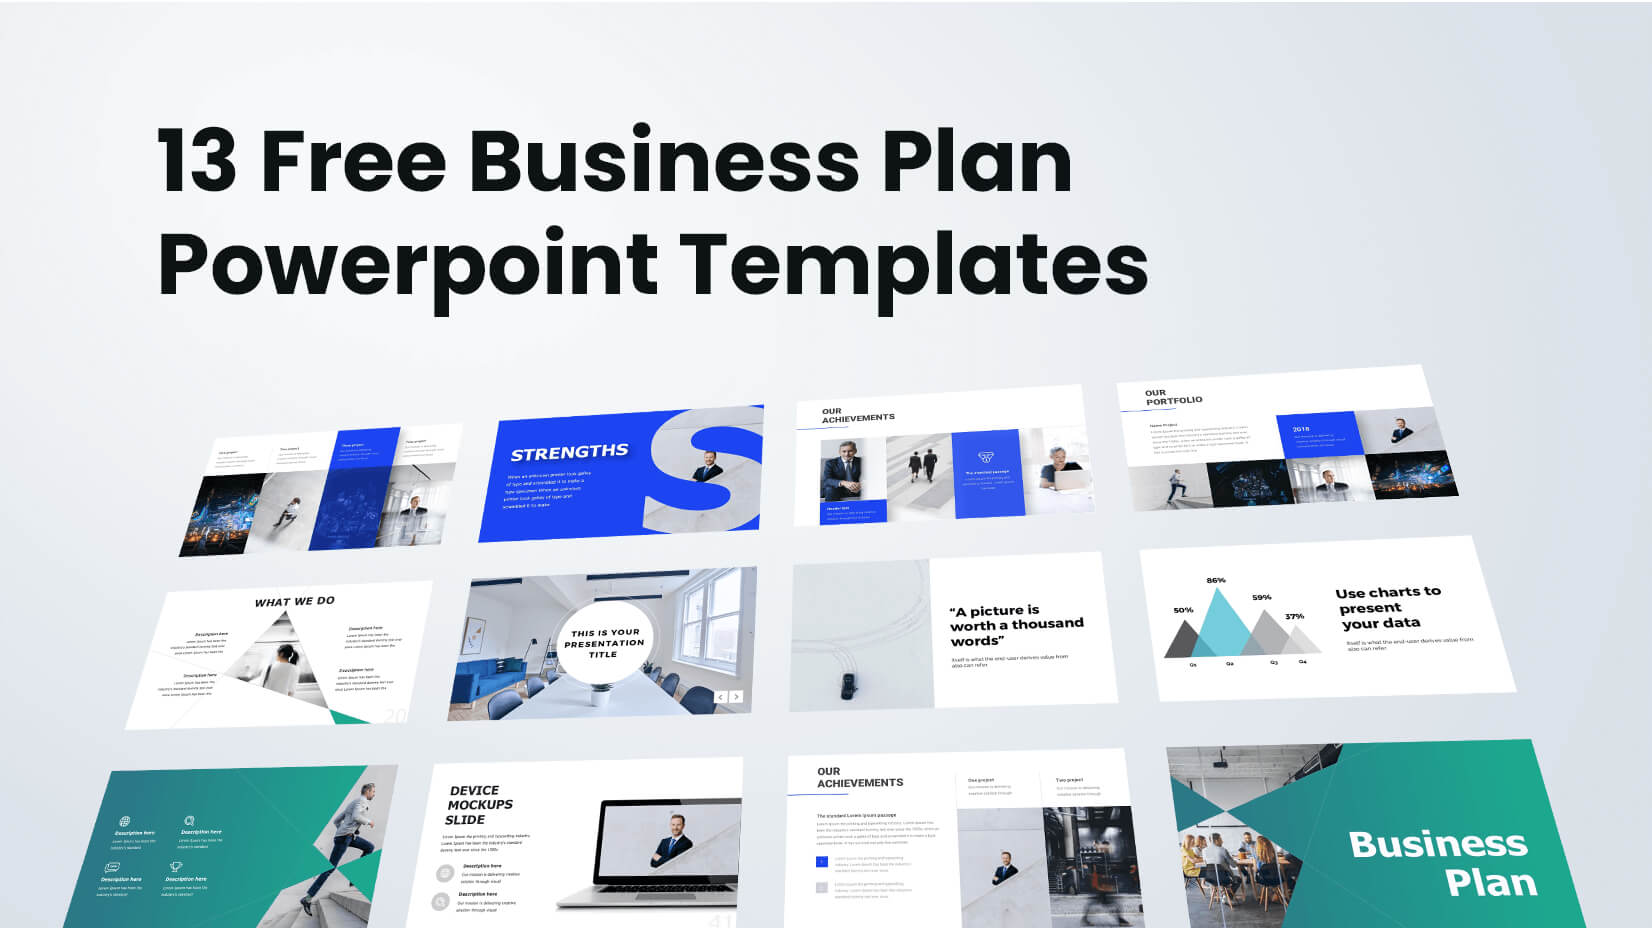 13 Free Business Plan Powerpoint Templates To Get Now Pertaining To How To Design A Powerpoint Template